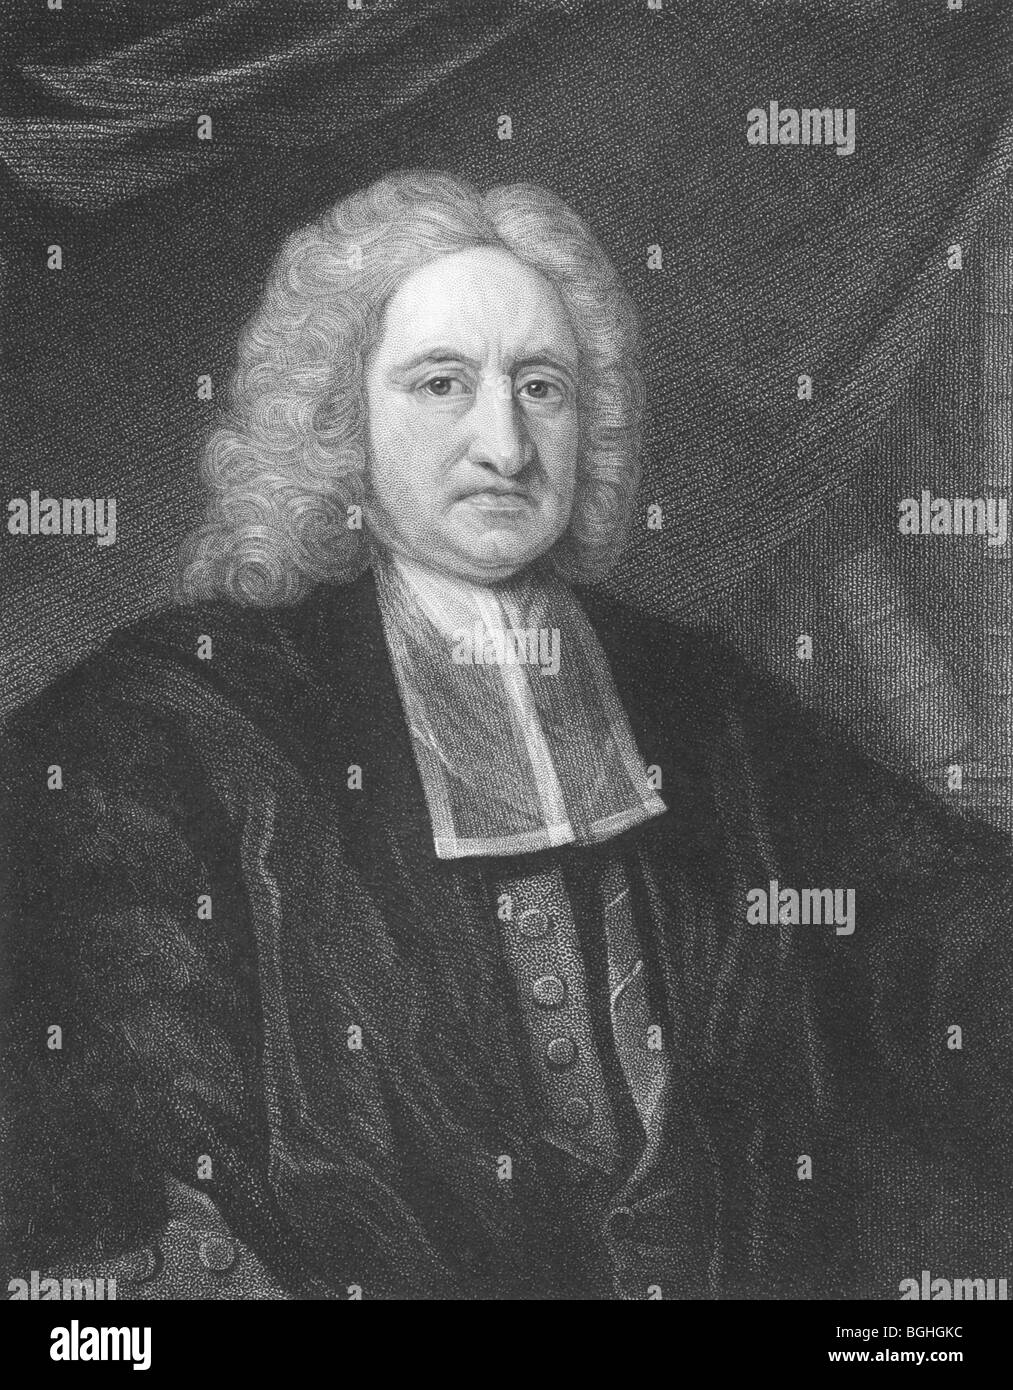 Edmond Halley on engraving from the 1850s. English astronomer, mathematician, physicist, geophysicist and meteorologist. Stock Photo